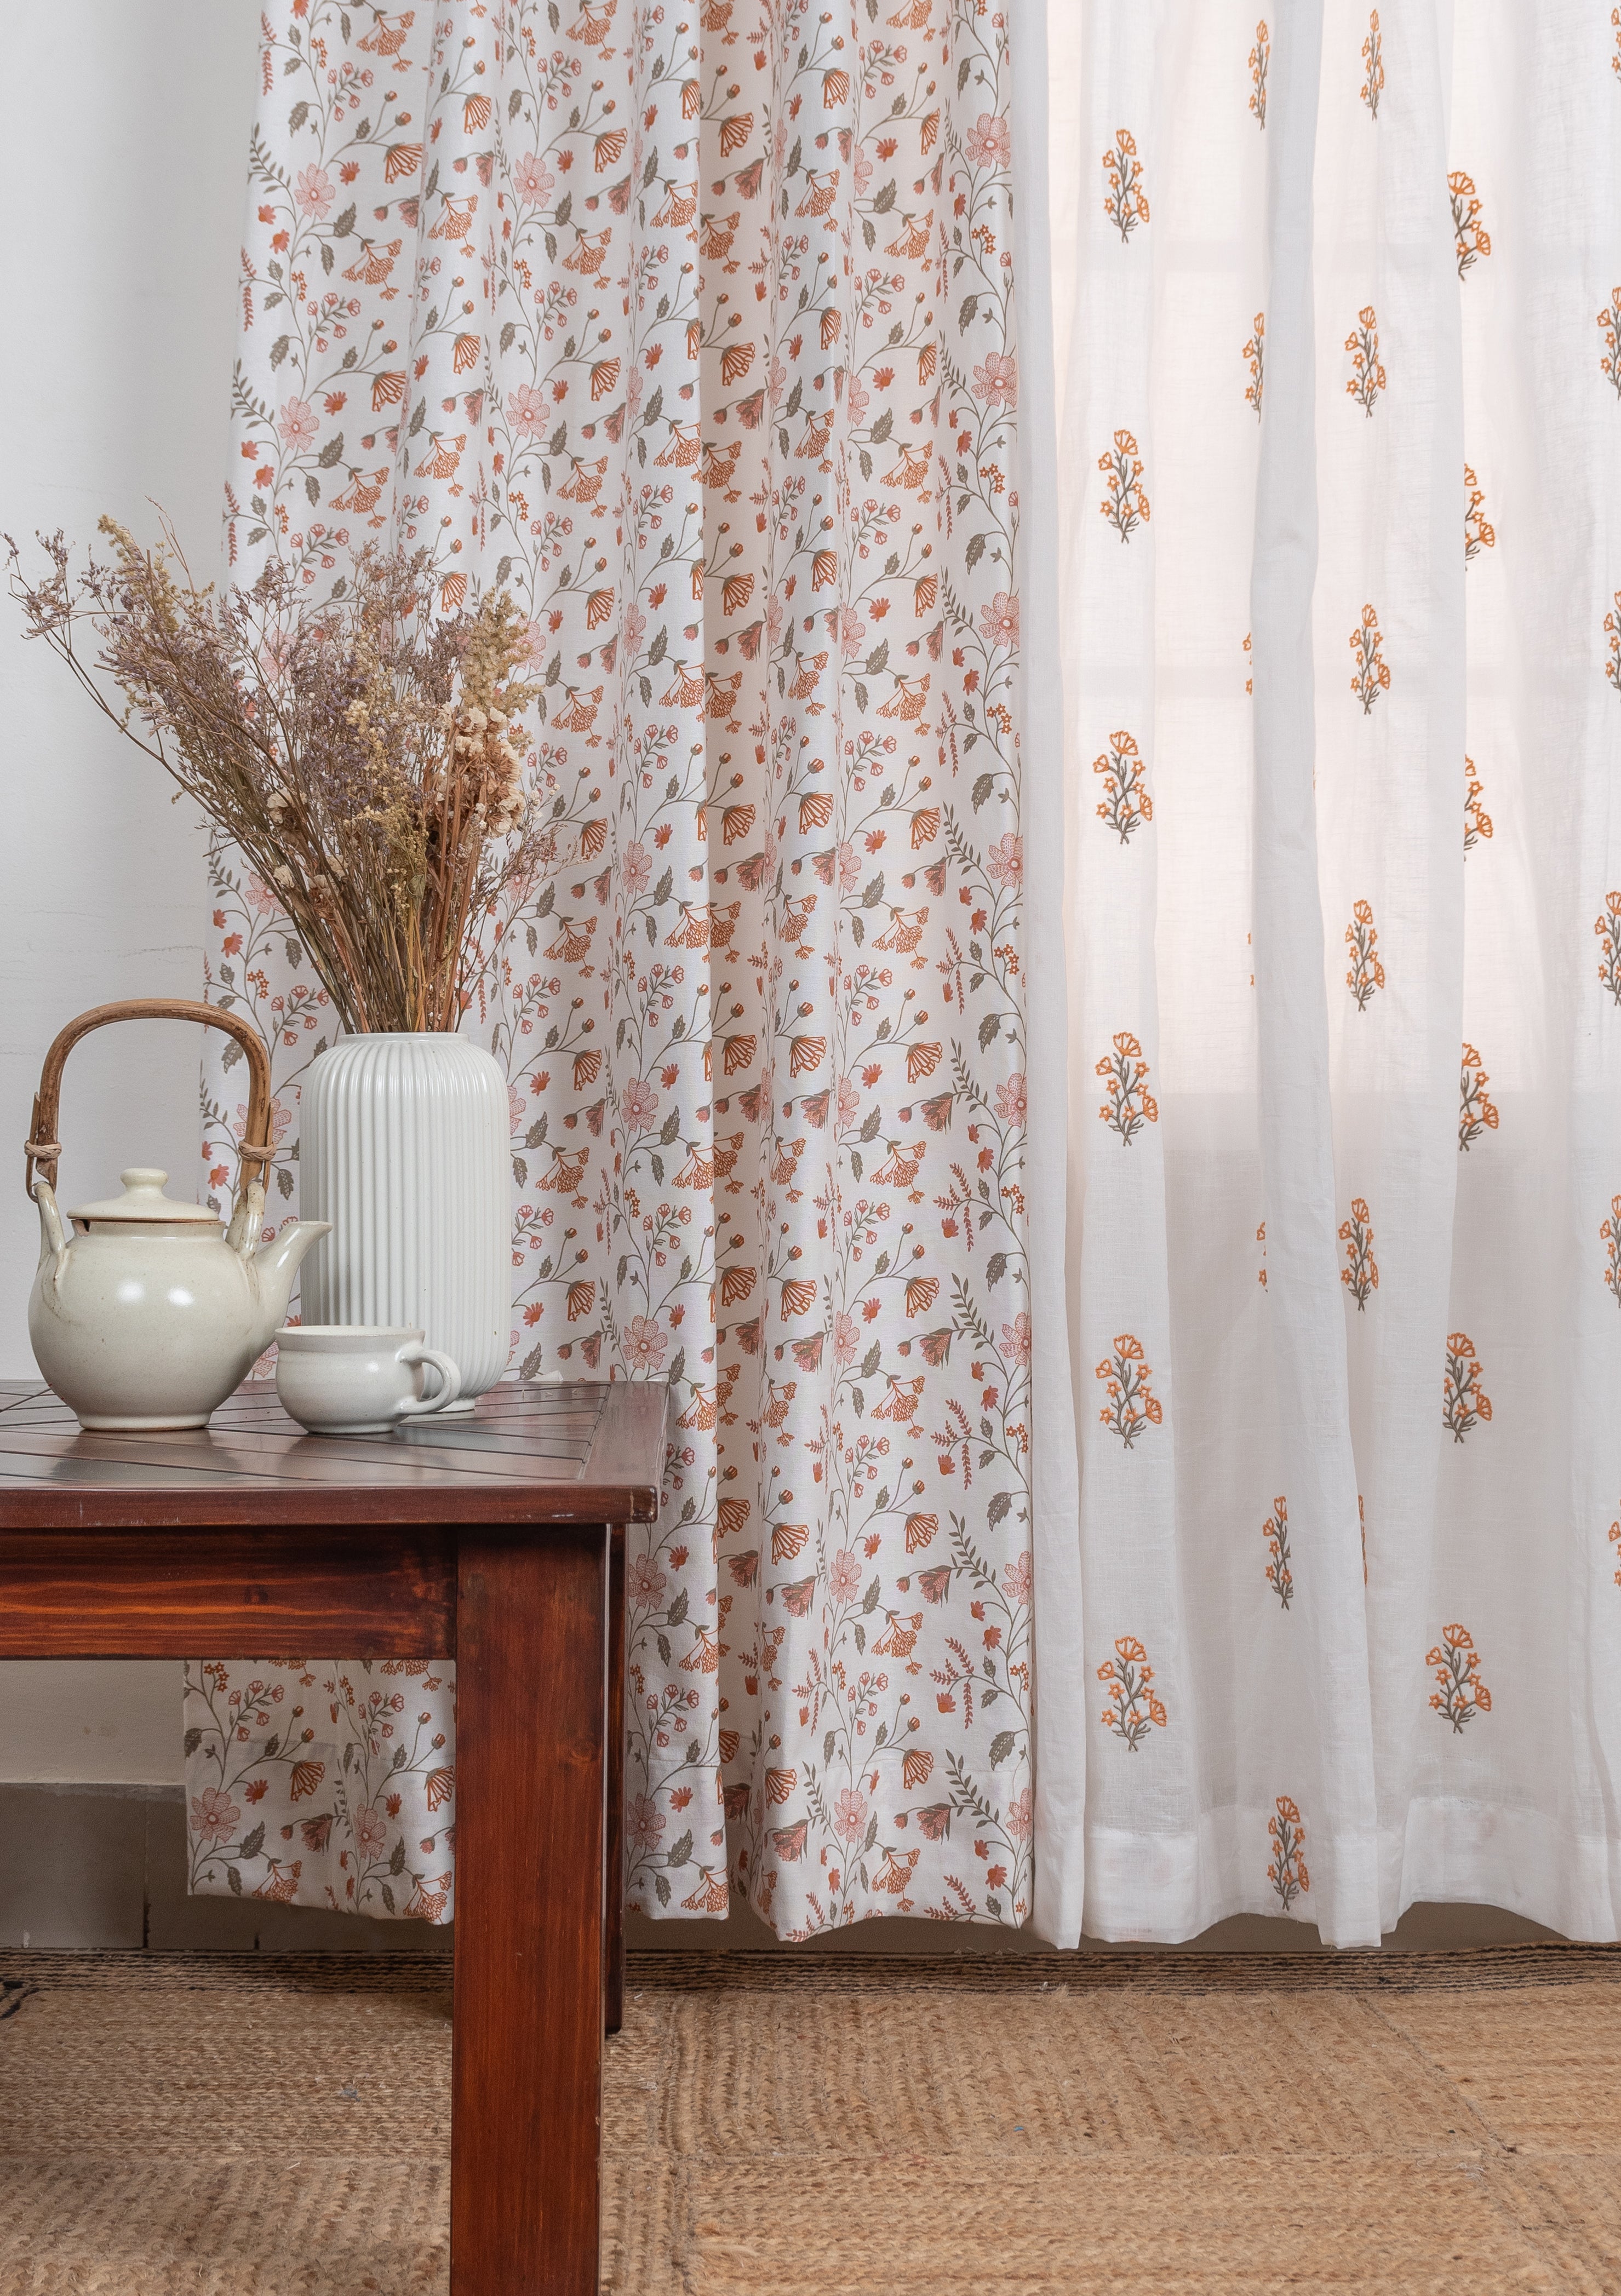 Forest bloom floral cotton curtain with Spring floral sheer orange 100% cotton curtains for living room - Set of 4